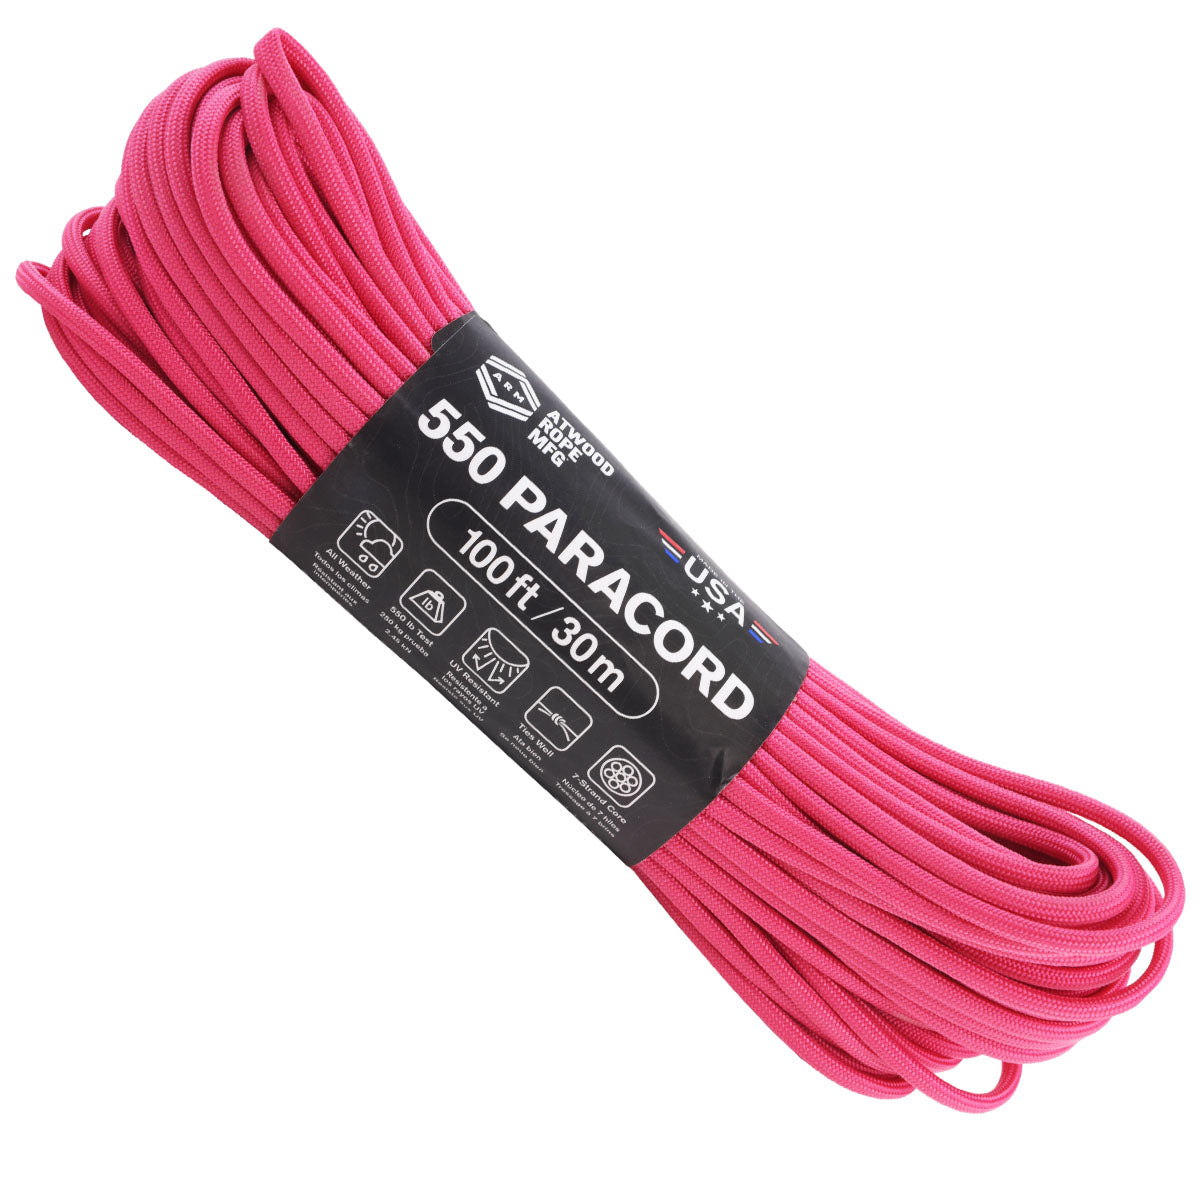 Paracord 50 ft  Tested and in stock